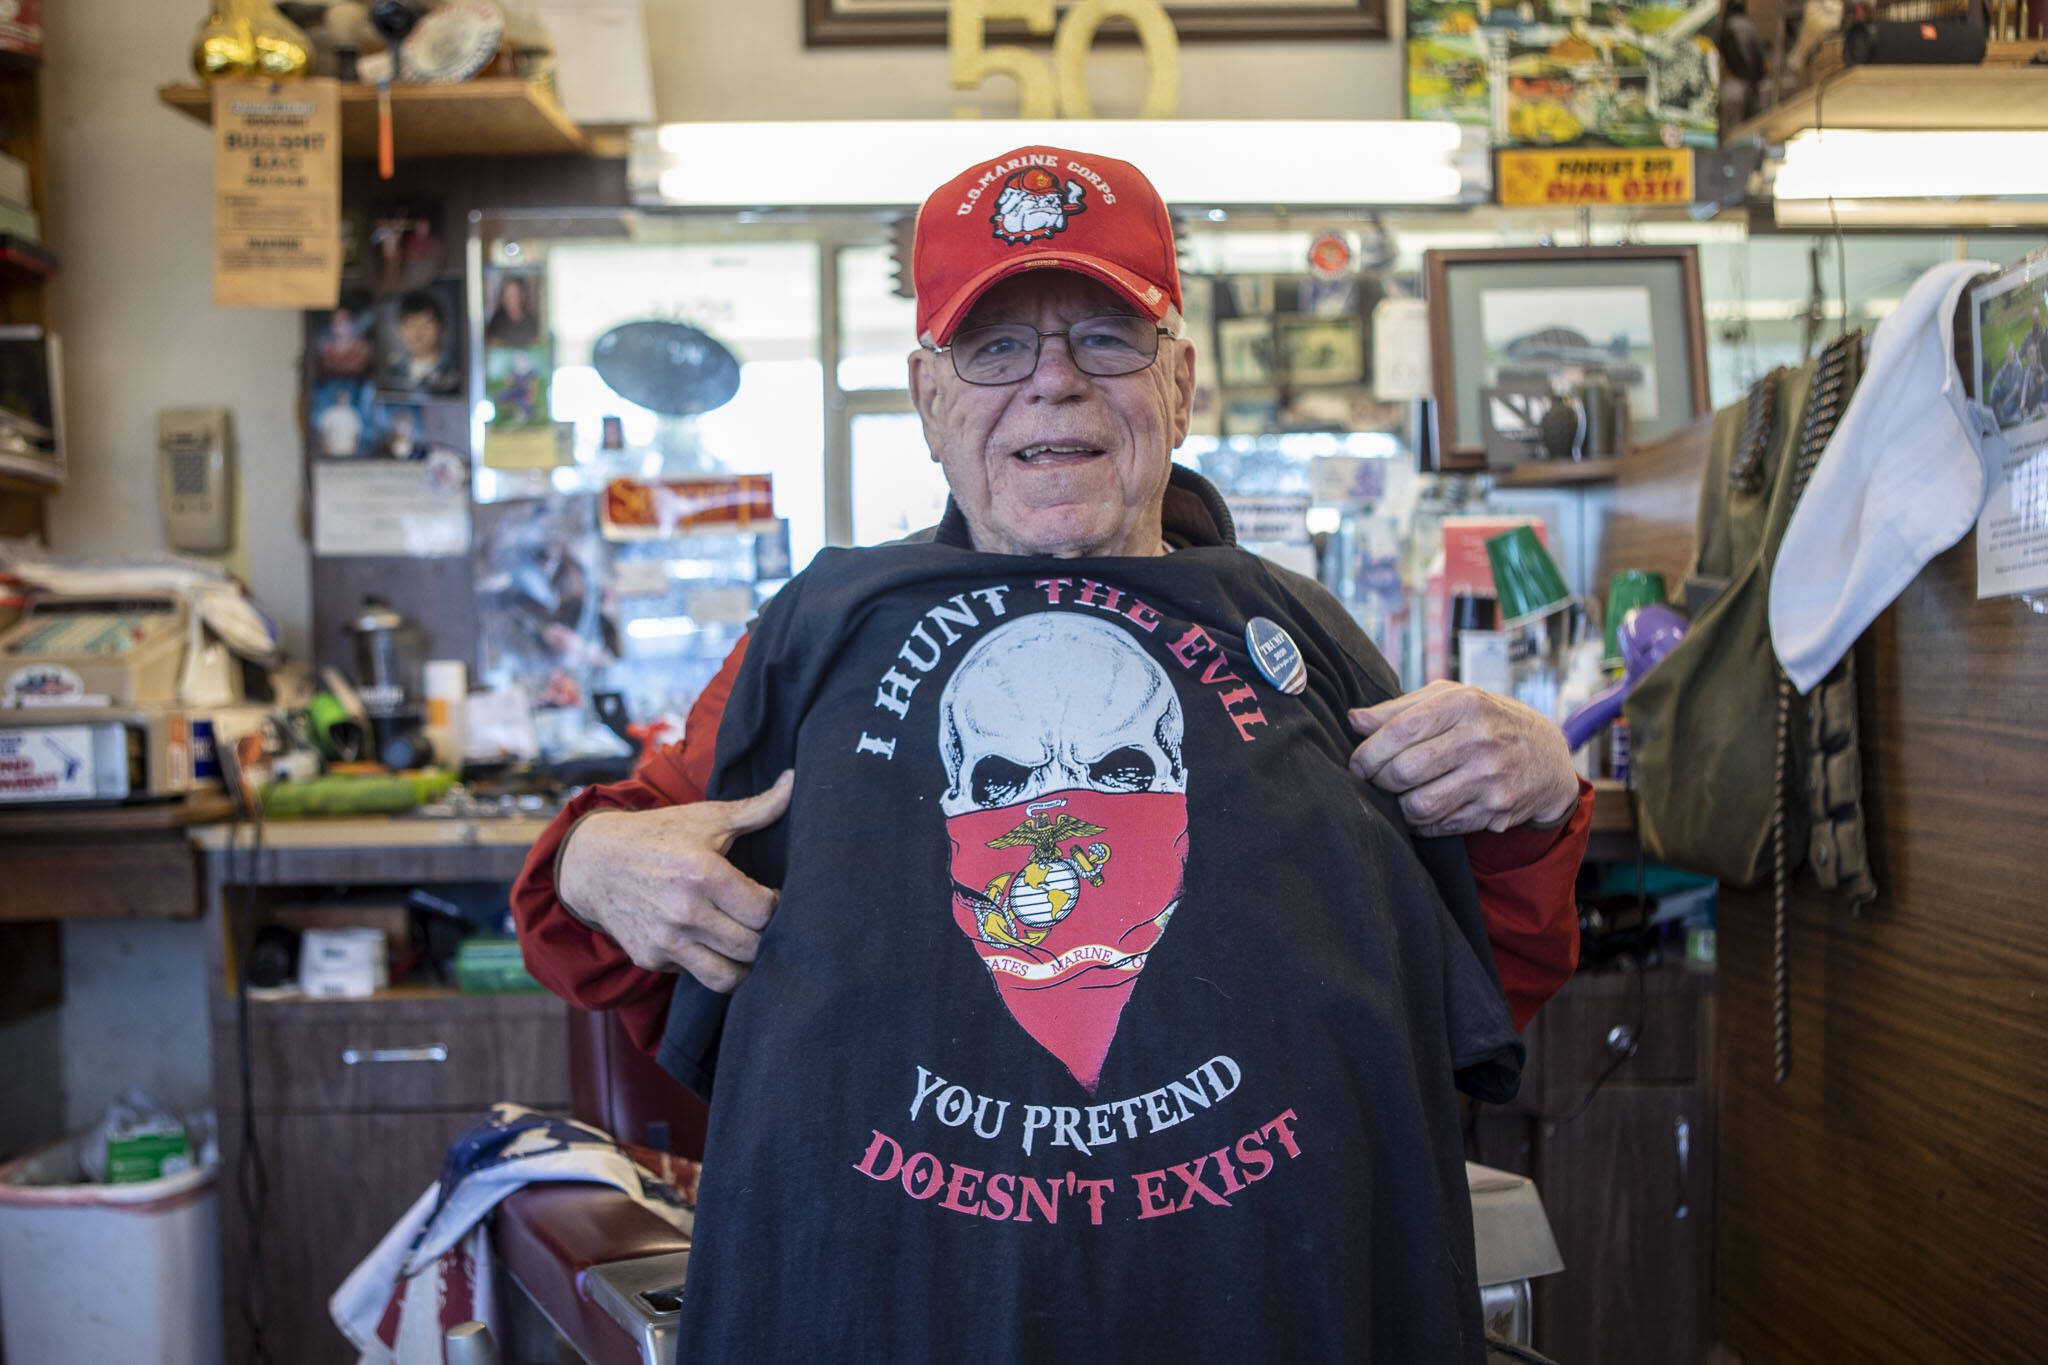 Bob Martin, 82, poses for a photo at The Stag Barbershop on March 22, 2023 in Snohomish, Washington. (Annie Barker / The Herald)